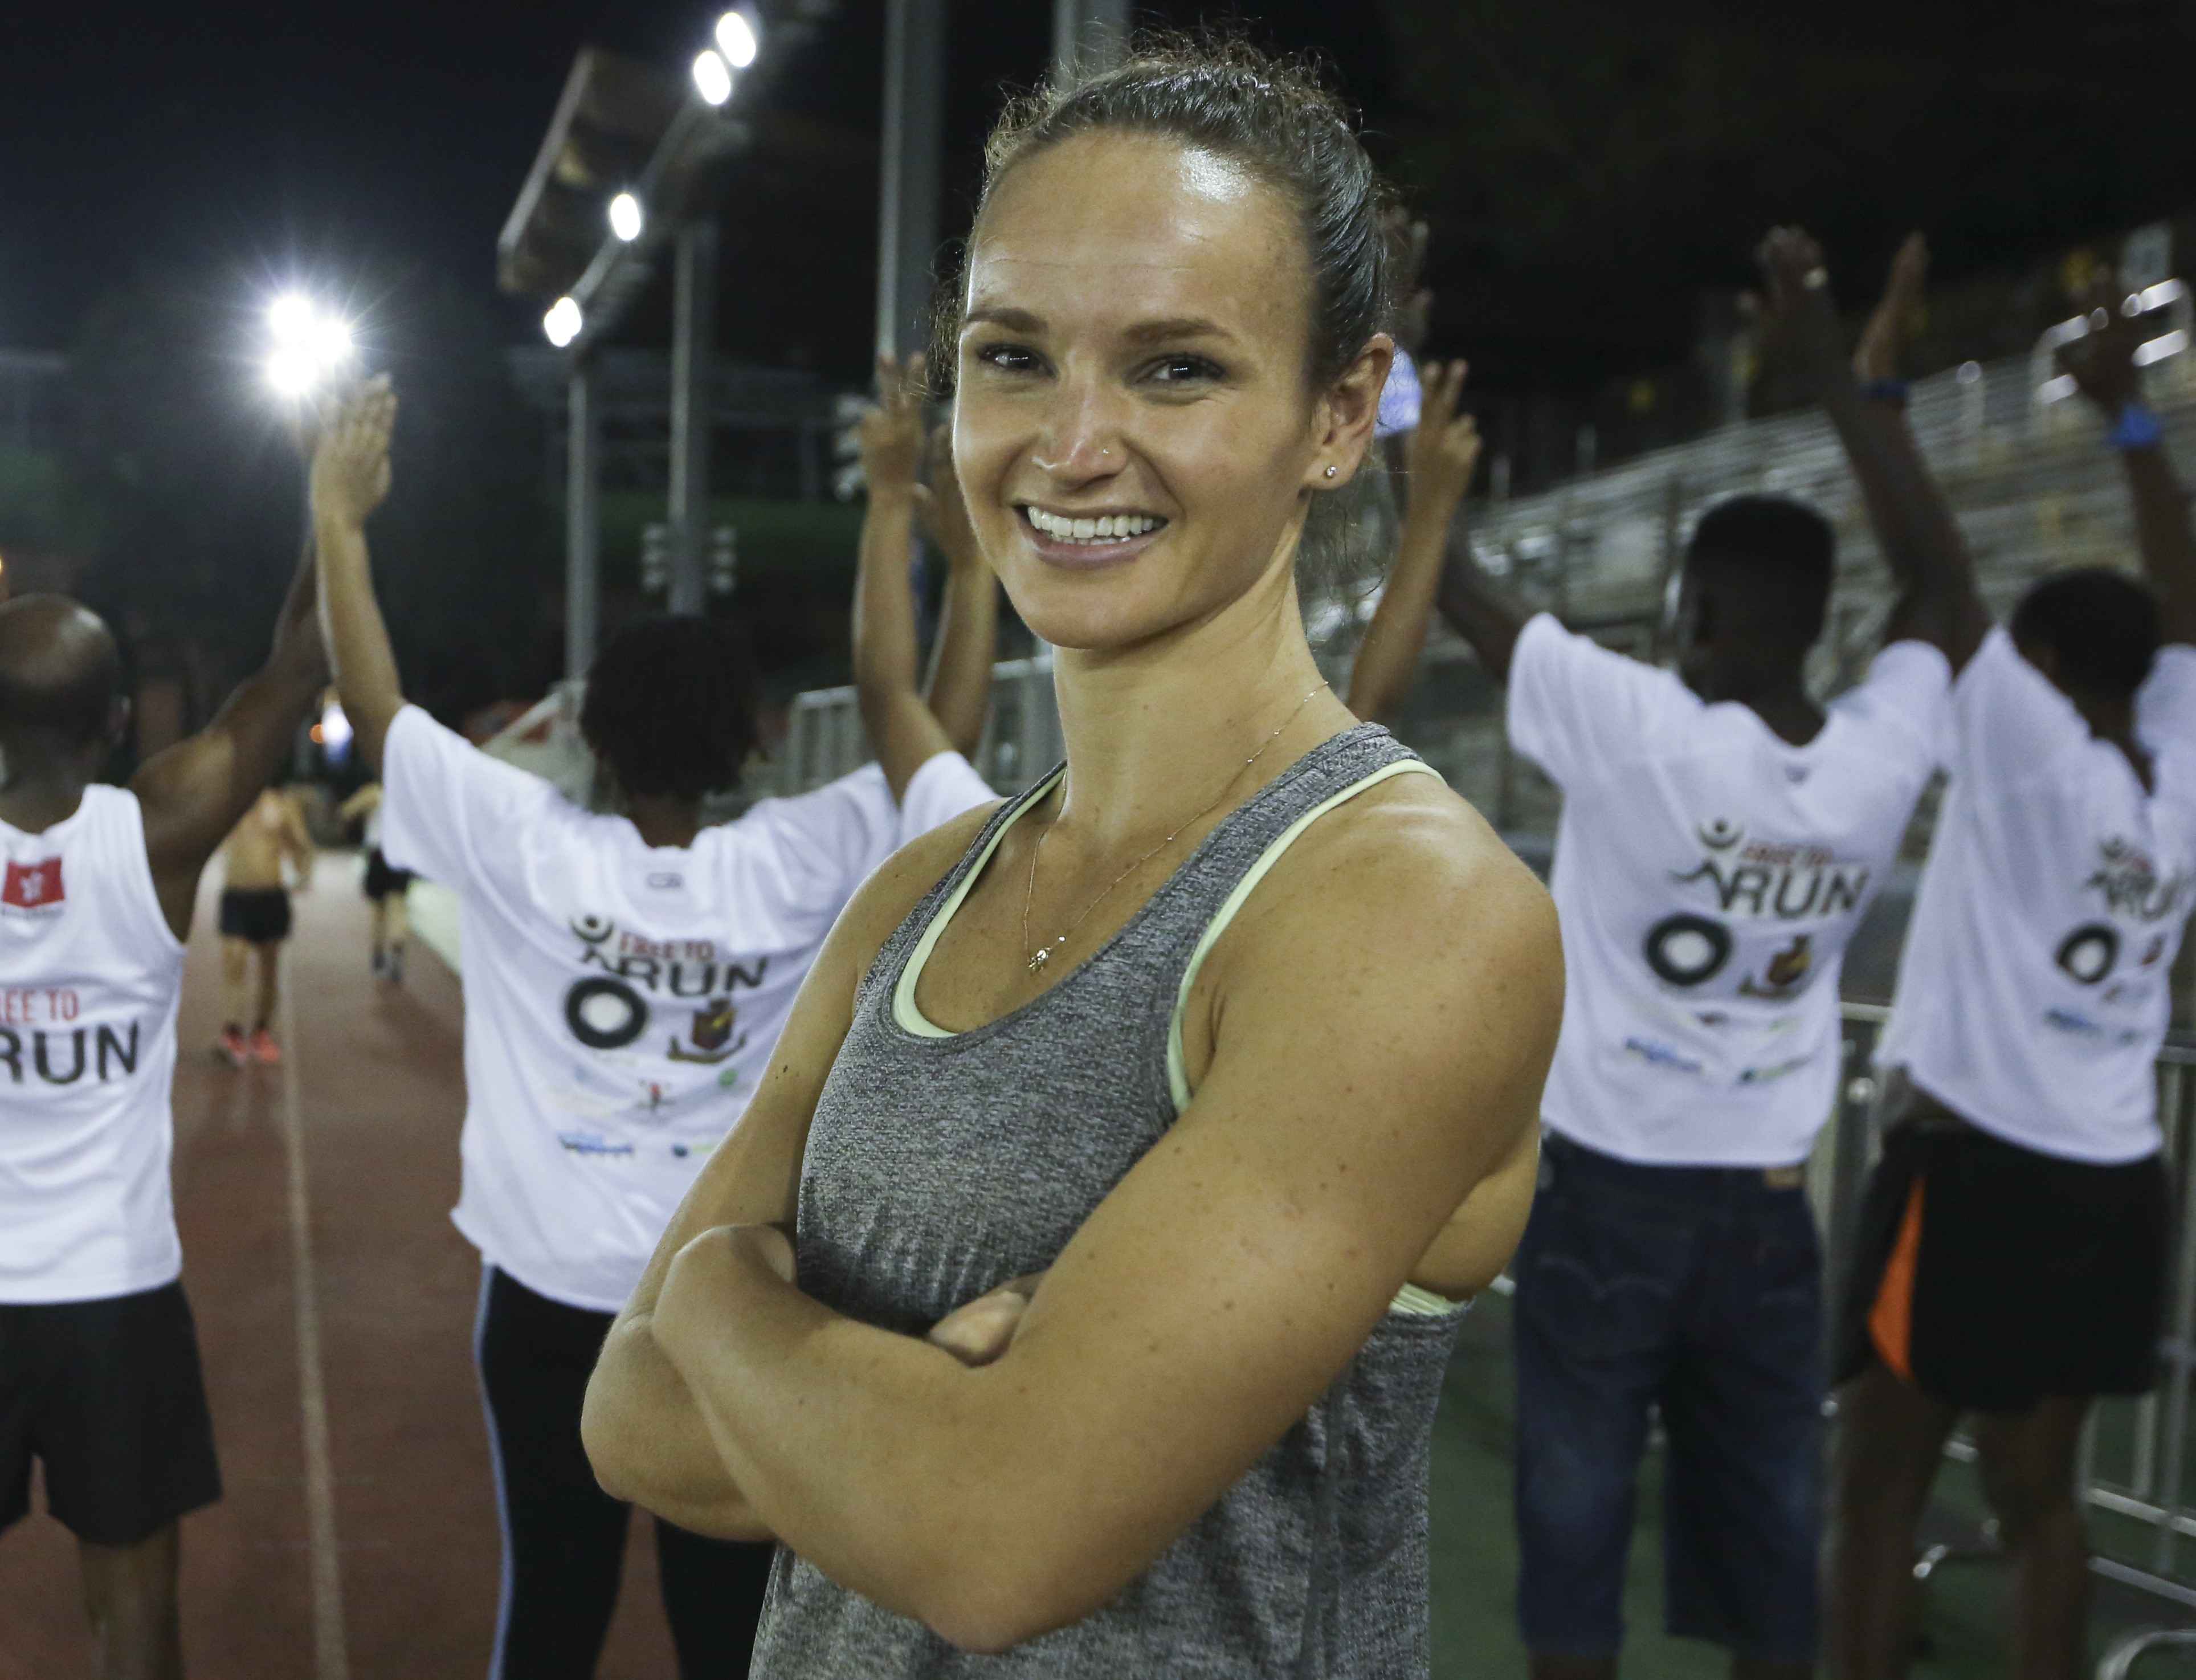 Mai Schroder, a PE teacher and volunteer for Free to Run, with Hong Kong refugees at a Free to Run training session at Aberdeen Sports Ground. Photo: Edmond So